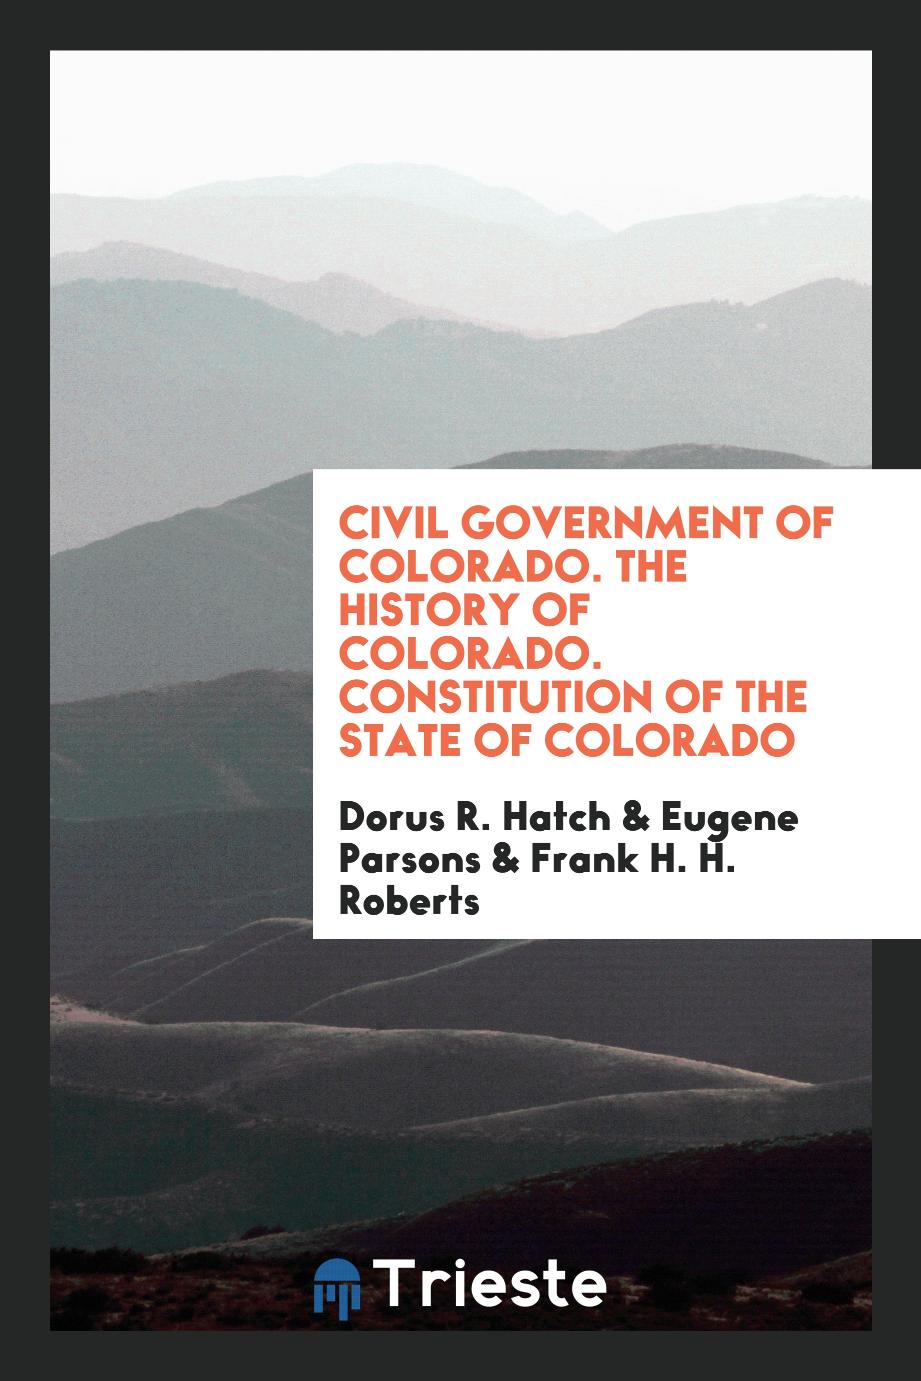 Civil government of Colorado. The history of Colorado. Constitution of the State of Colorado